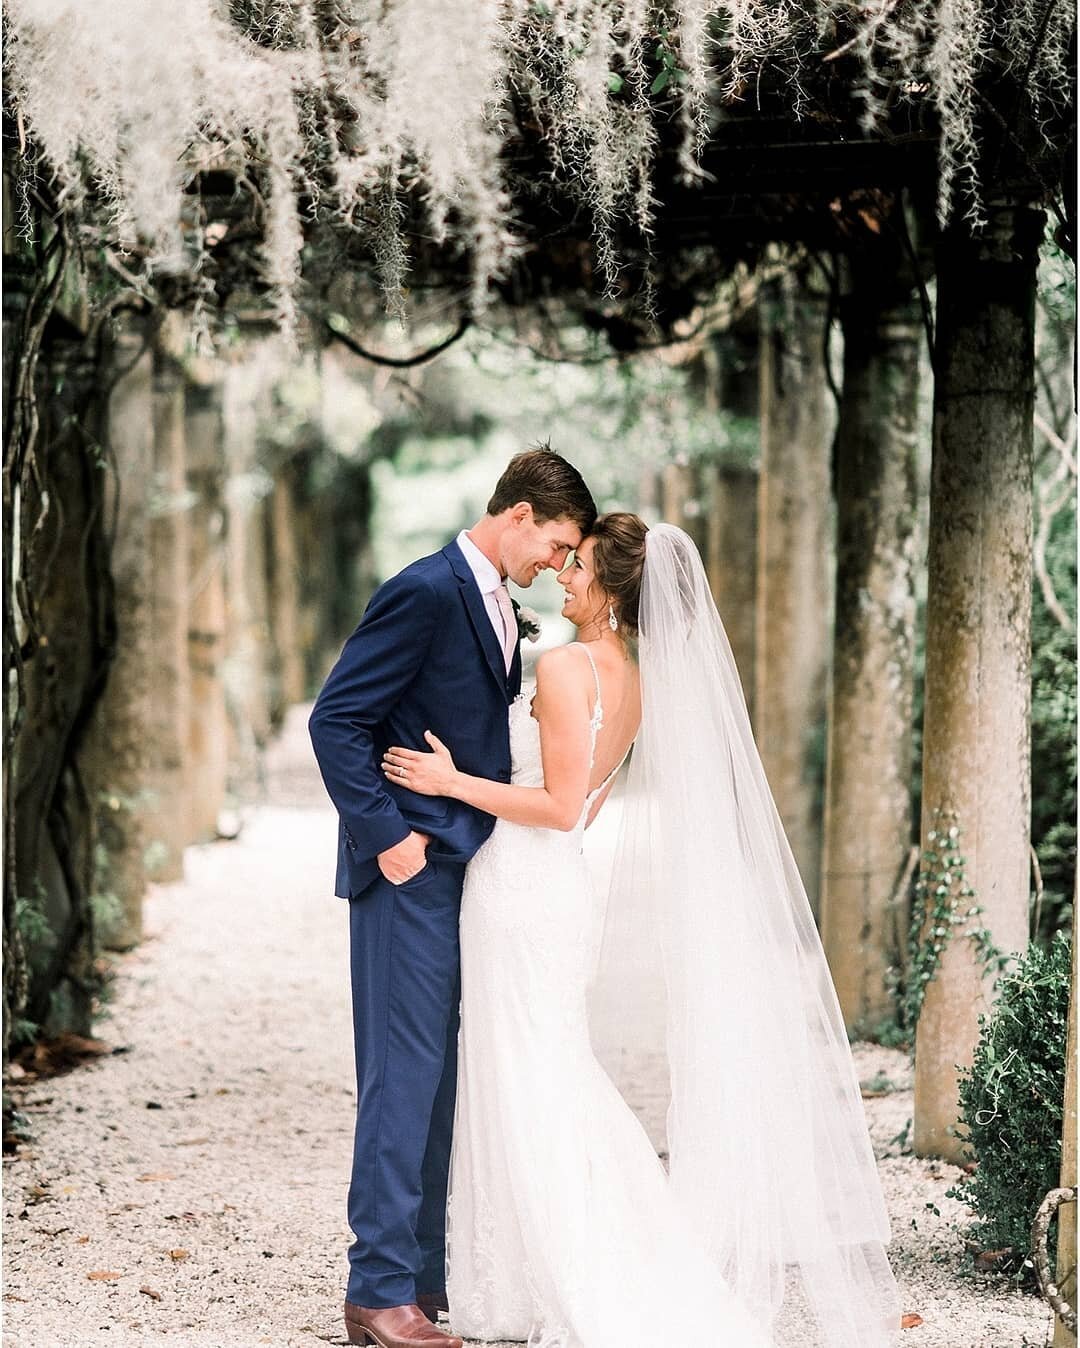 What's not to love about the Spanish moss and romantic lighting in the Pergola Garden at Airlie 😍
 . 
 . 
 . 
#wilmingtonweddings #weddingplanner #airliegardens #pergolagarden #airlieweddings #brideandgroom #weddingday #bubblyeventsnc #bubblyevents 